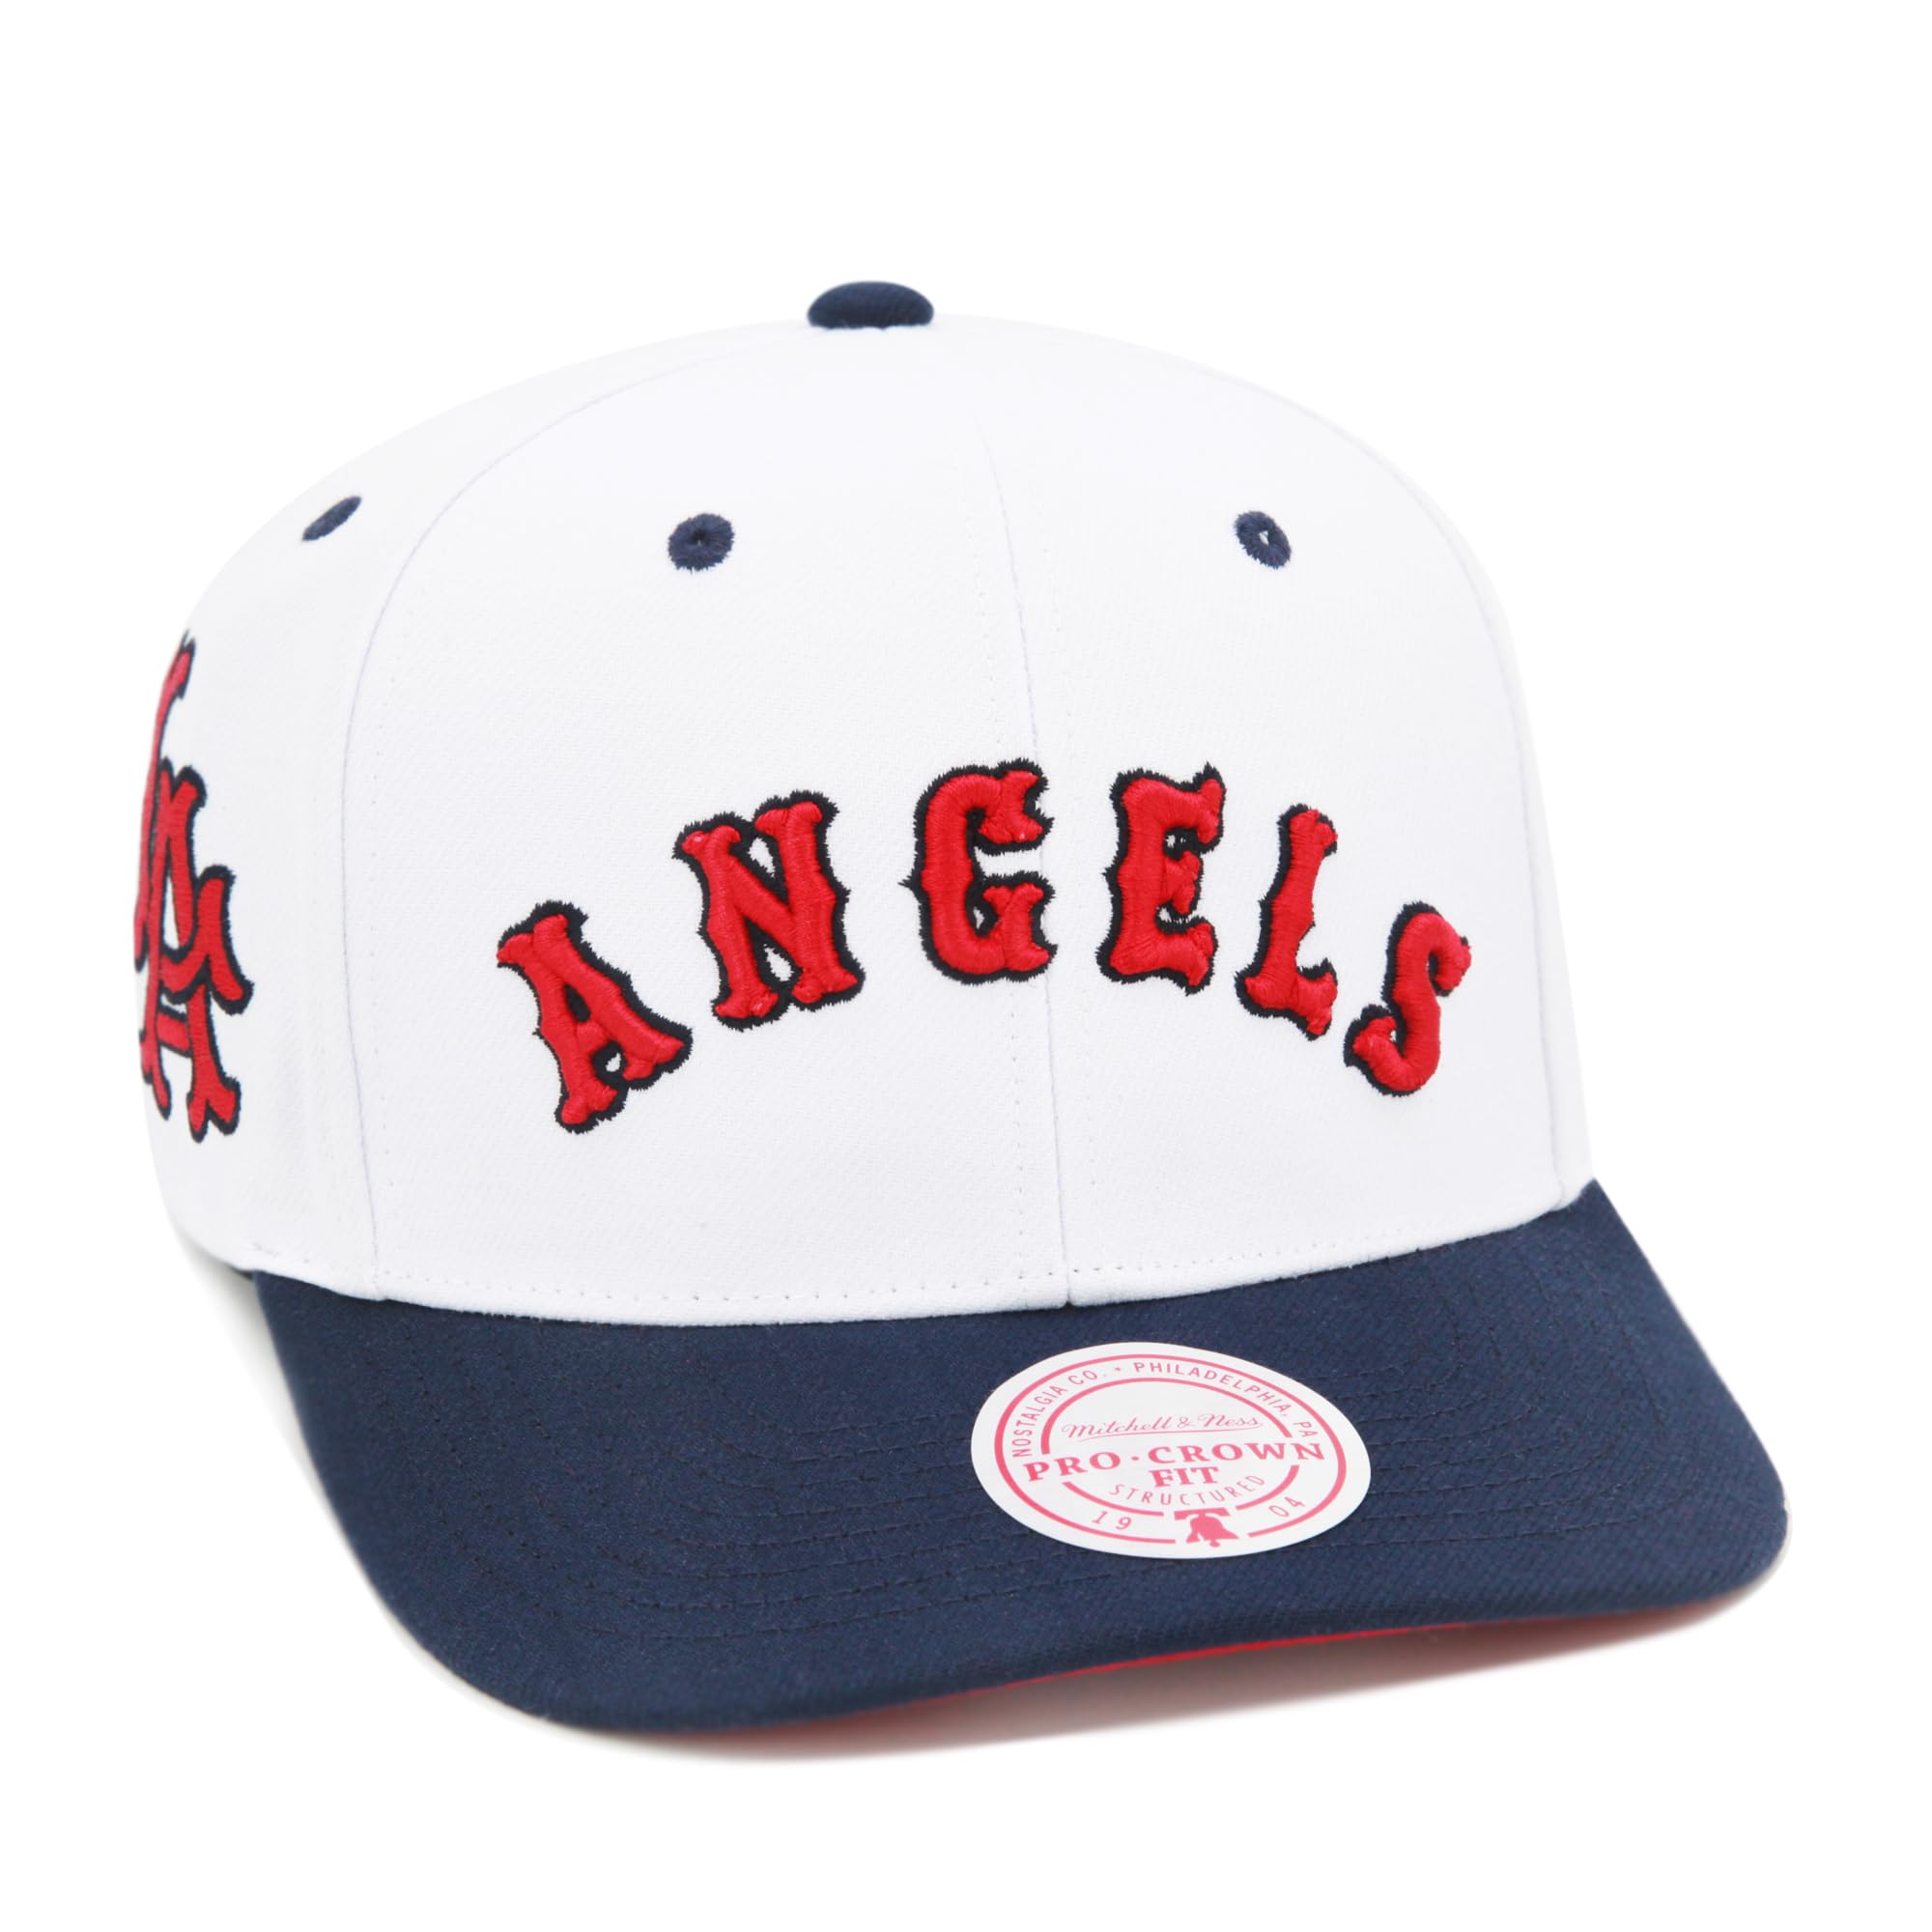 Mitchell & Ness Los Angeles Angels Cooperstown MLB Evergreen Pro Snapback Hat Cap - White - Caps Fitted Caps Fitted Mitchell & Ness